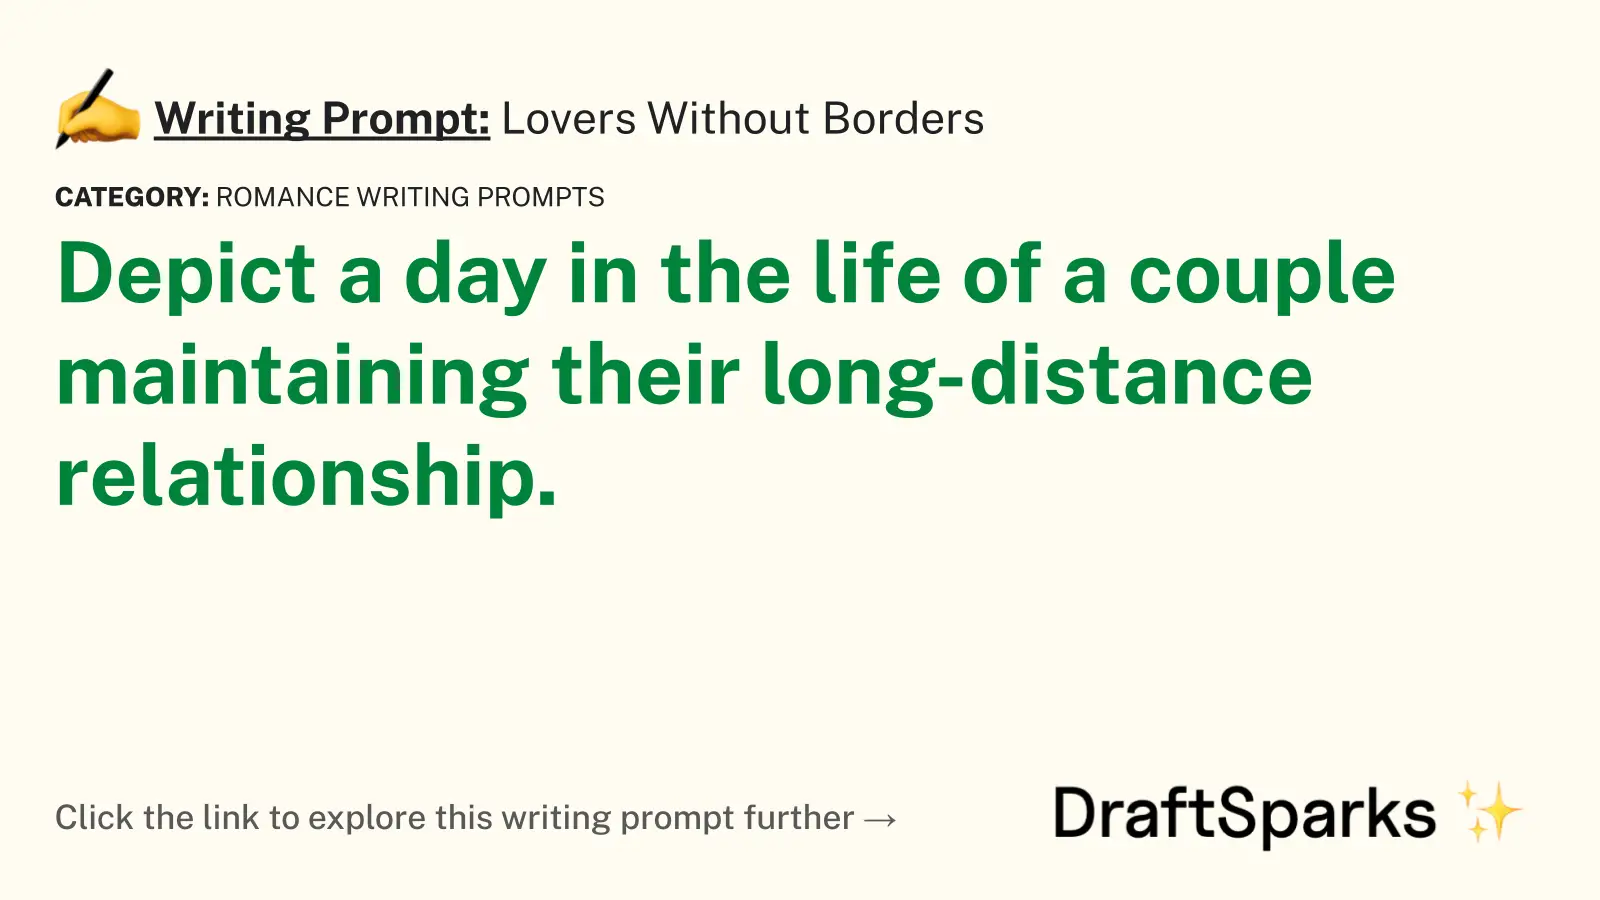 Lovers Without Borders